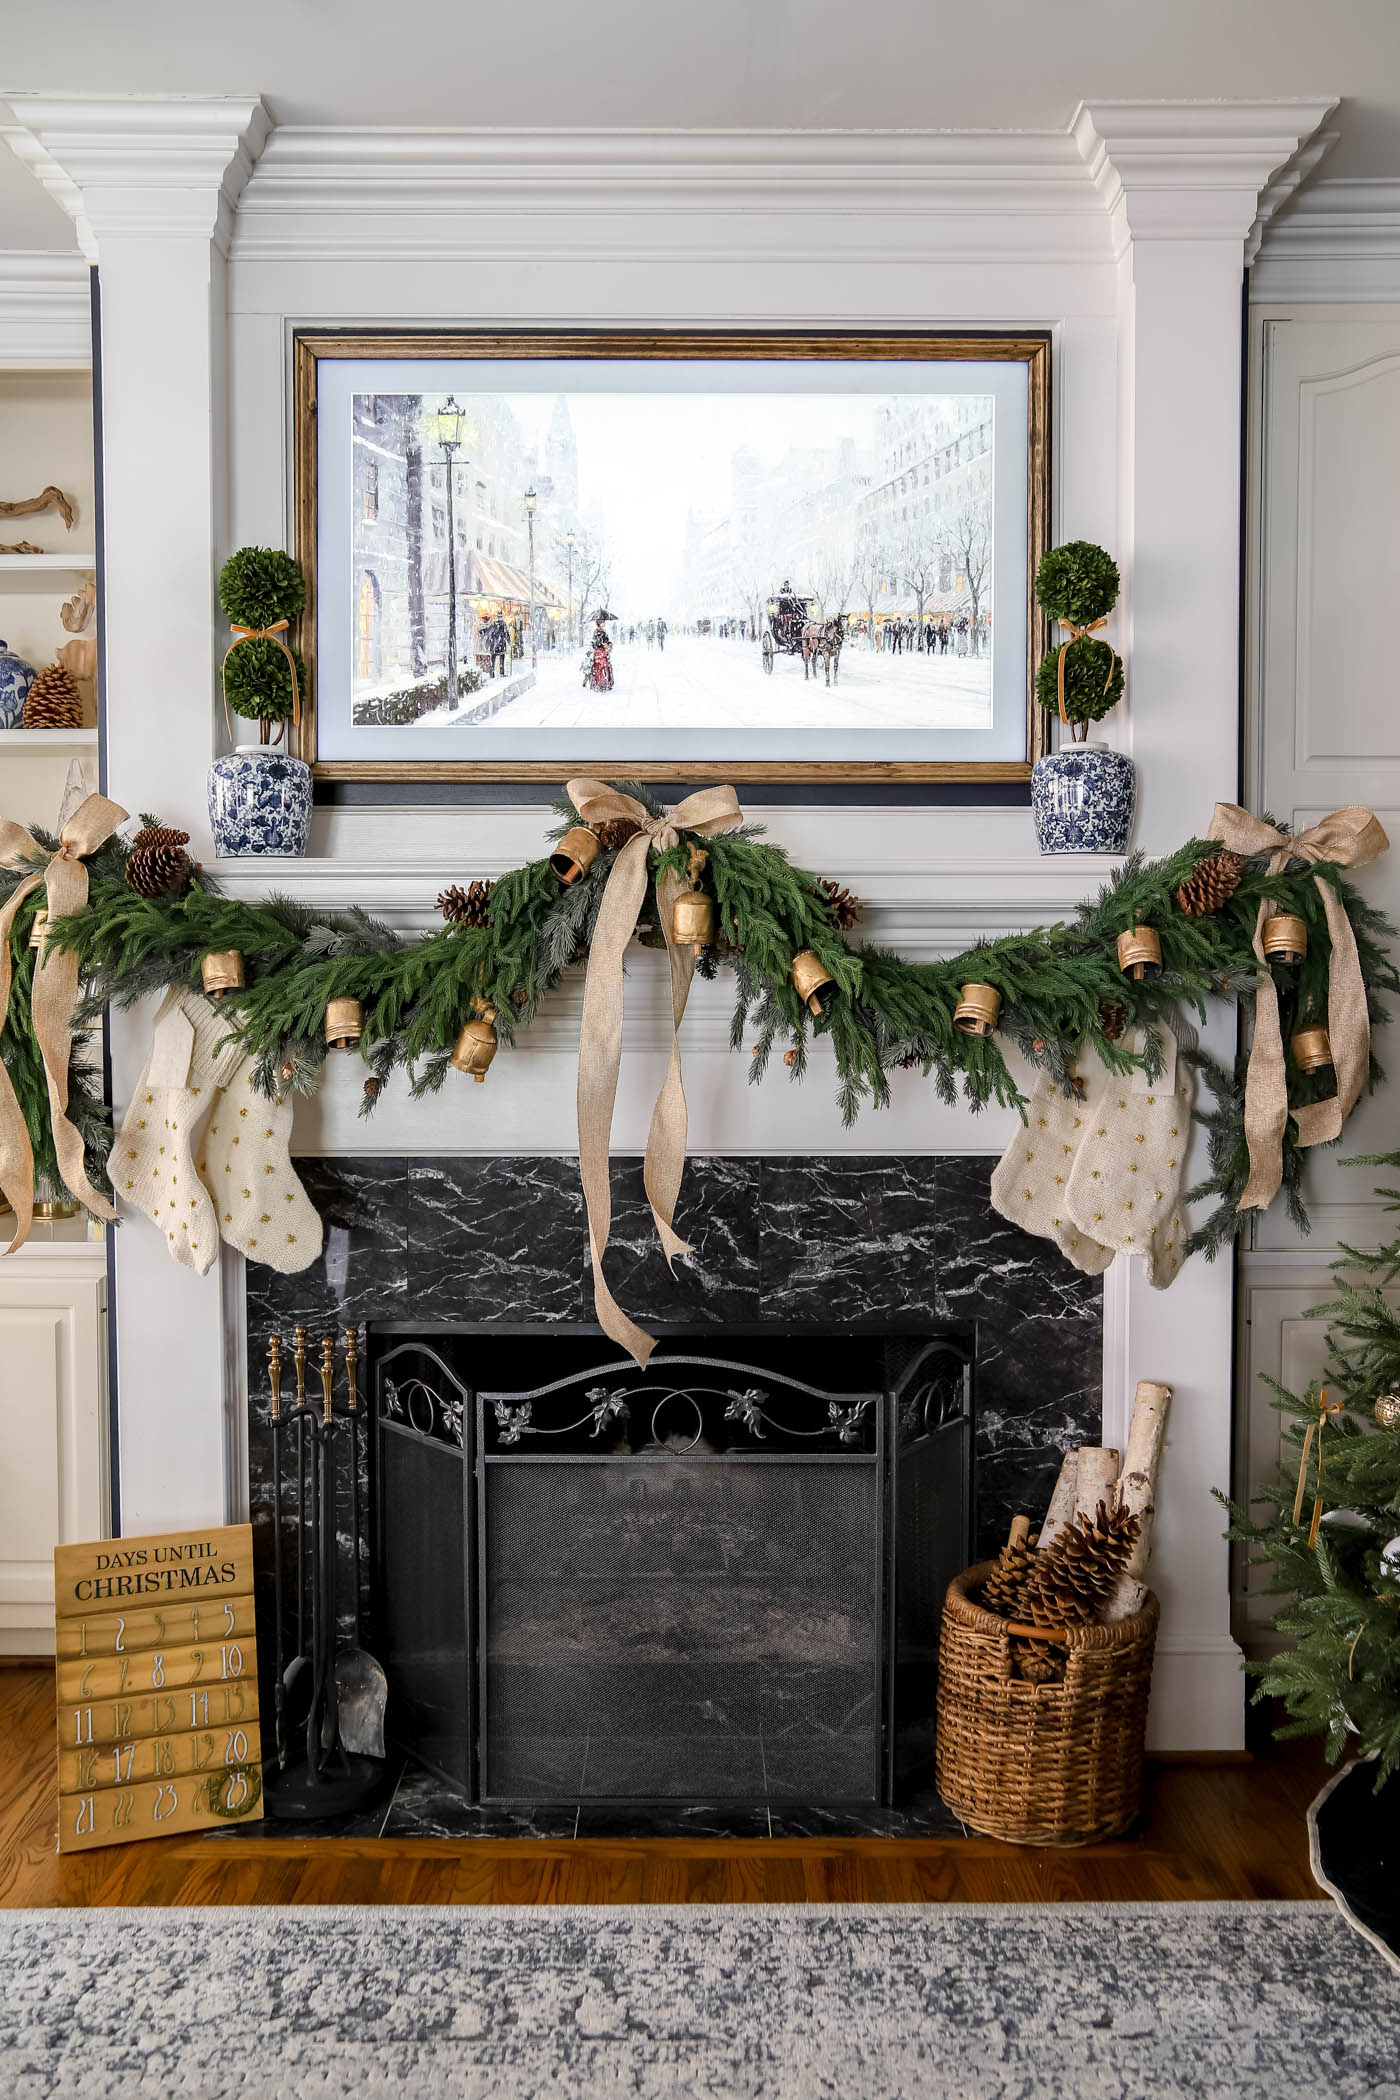 Blue and White Christmas Decor on the Mantel